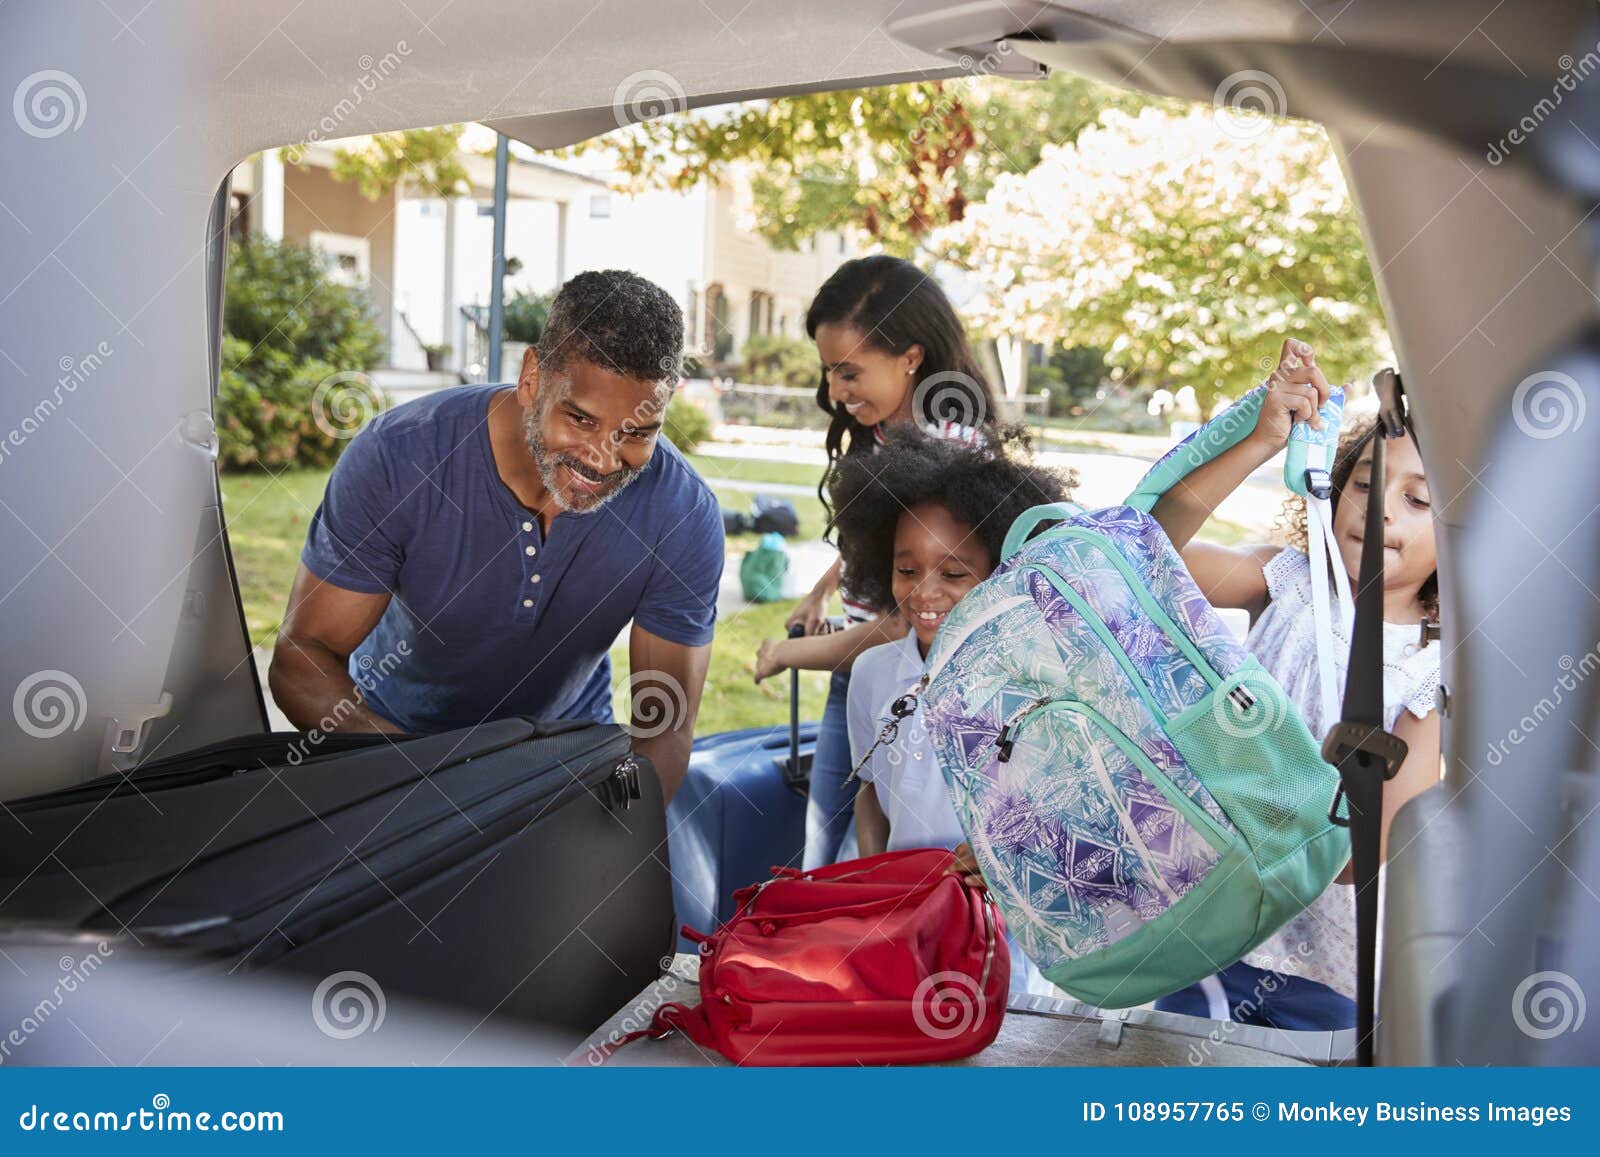 family leaving for vacation loading luggage into car